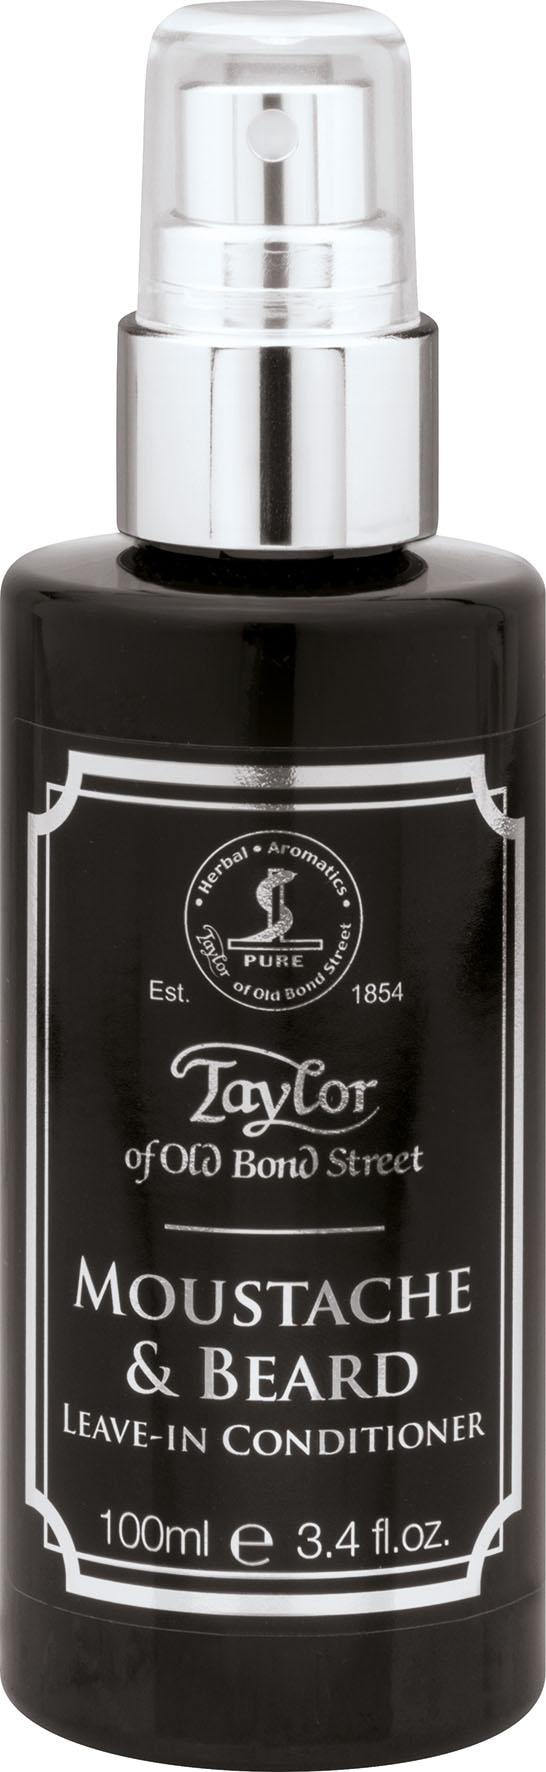 Taylor of Old Bartconditioner Conditioner« »Moustache online kaufen & Leave-In Street bei Bond Beard OTTO